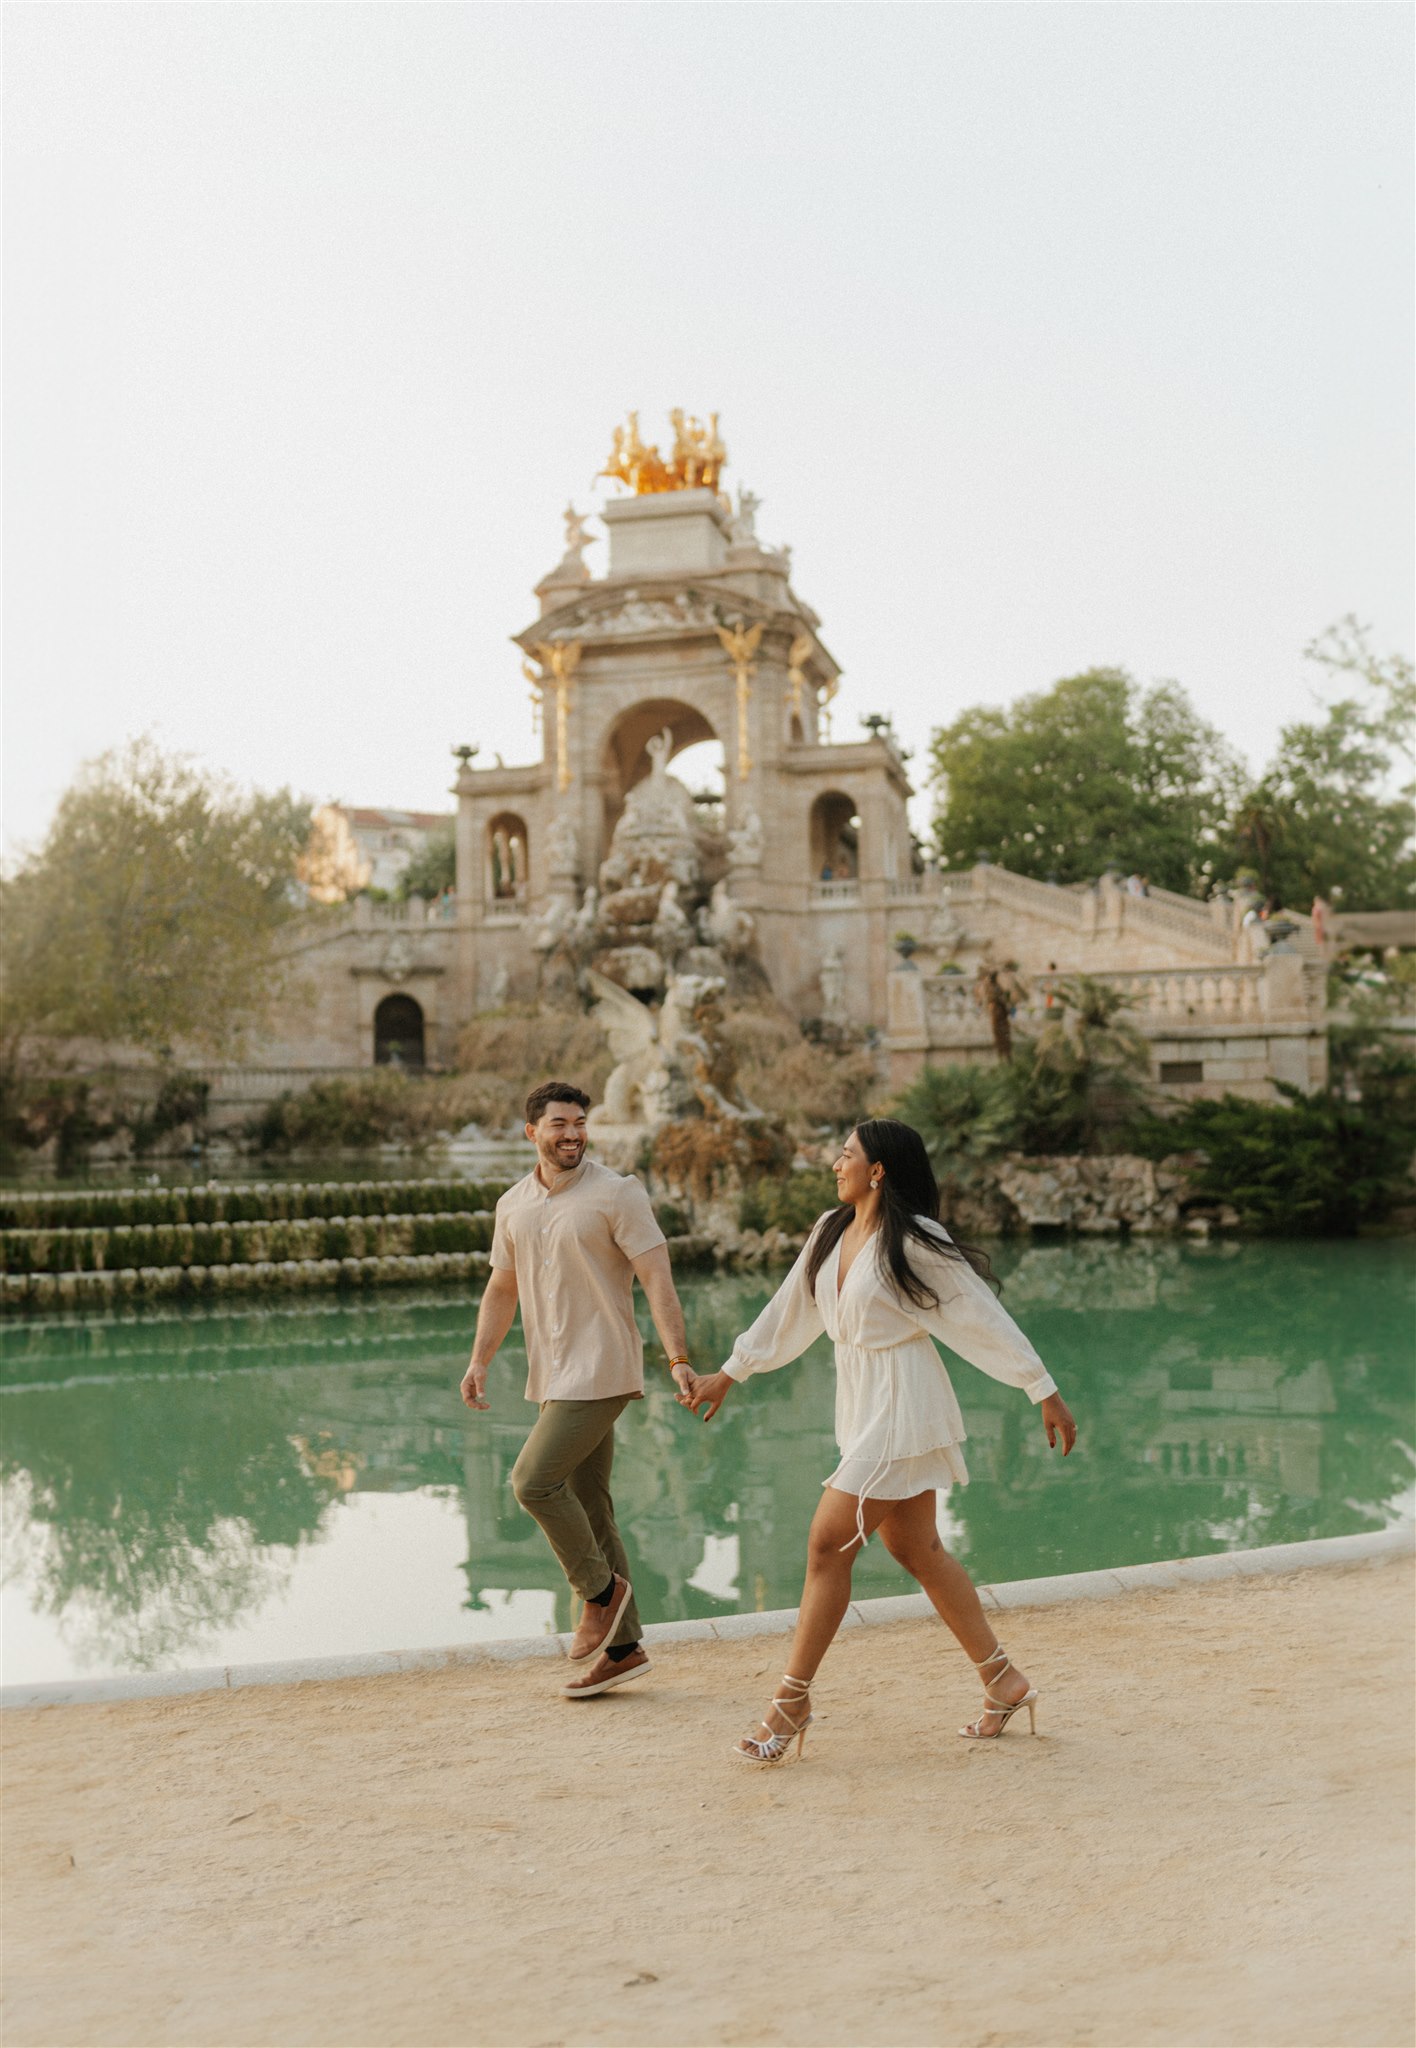 Candid walking shot of a couple in beige neutral clothing within the Ciutadella Park.